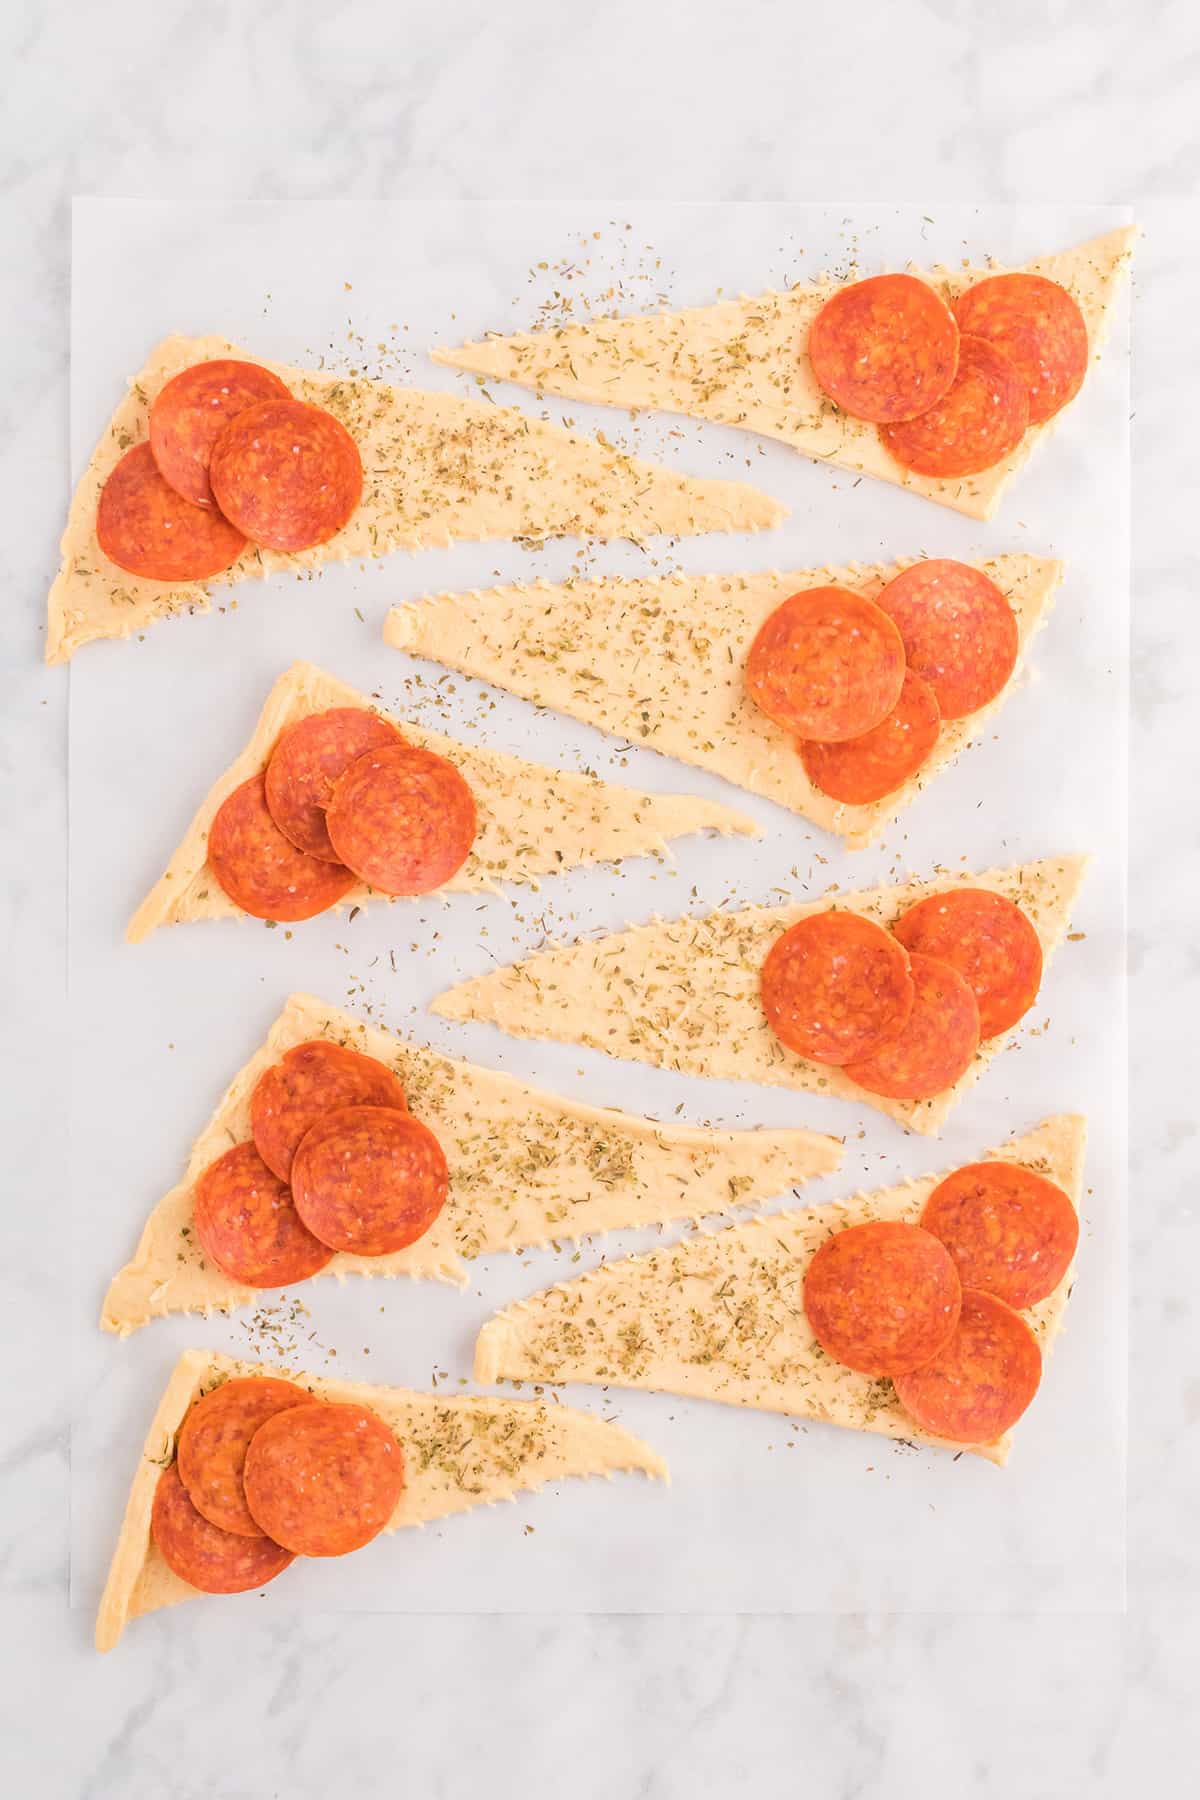 Pepperoni added to each dough triangle.